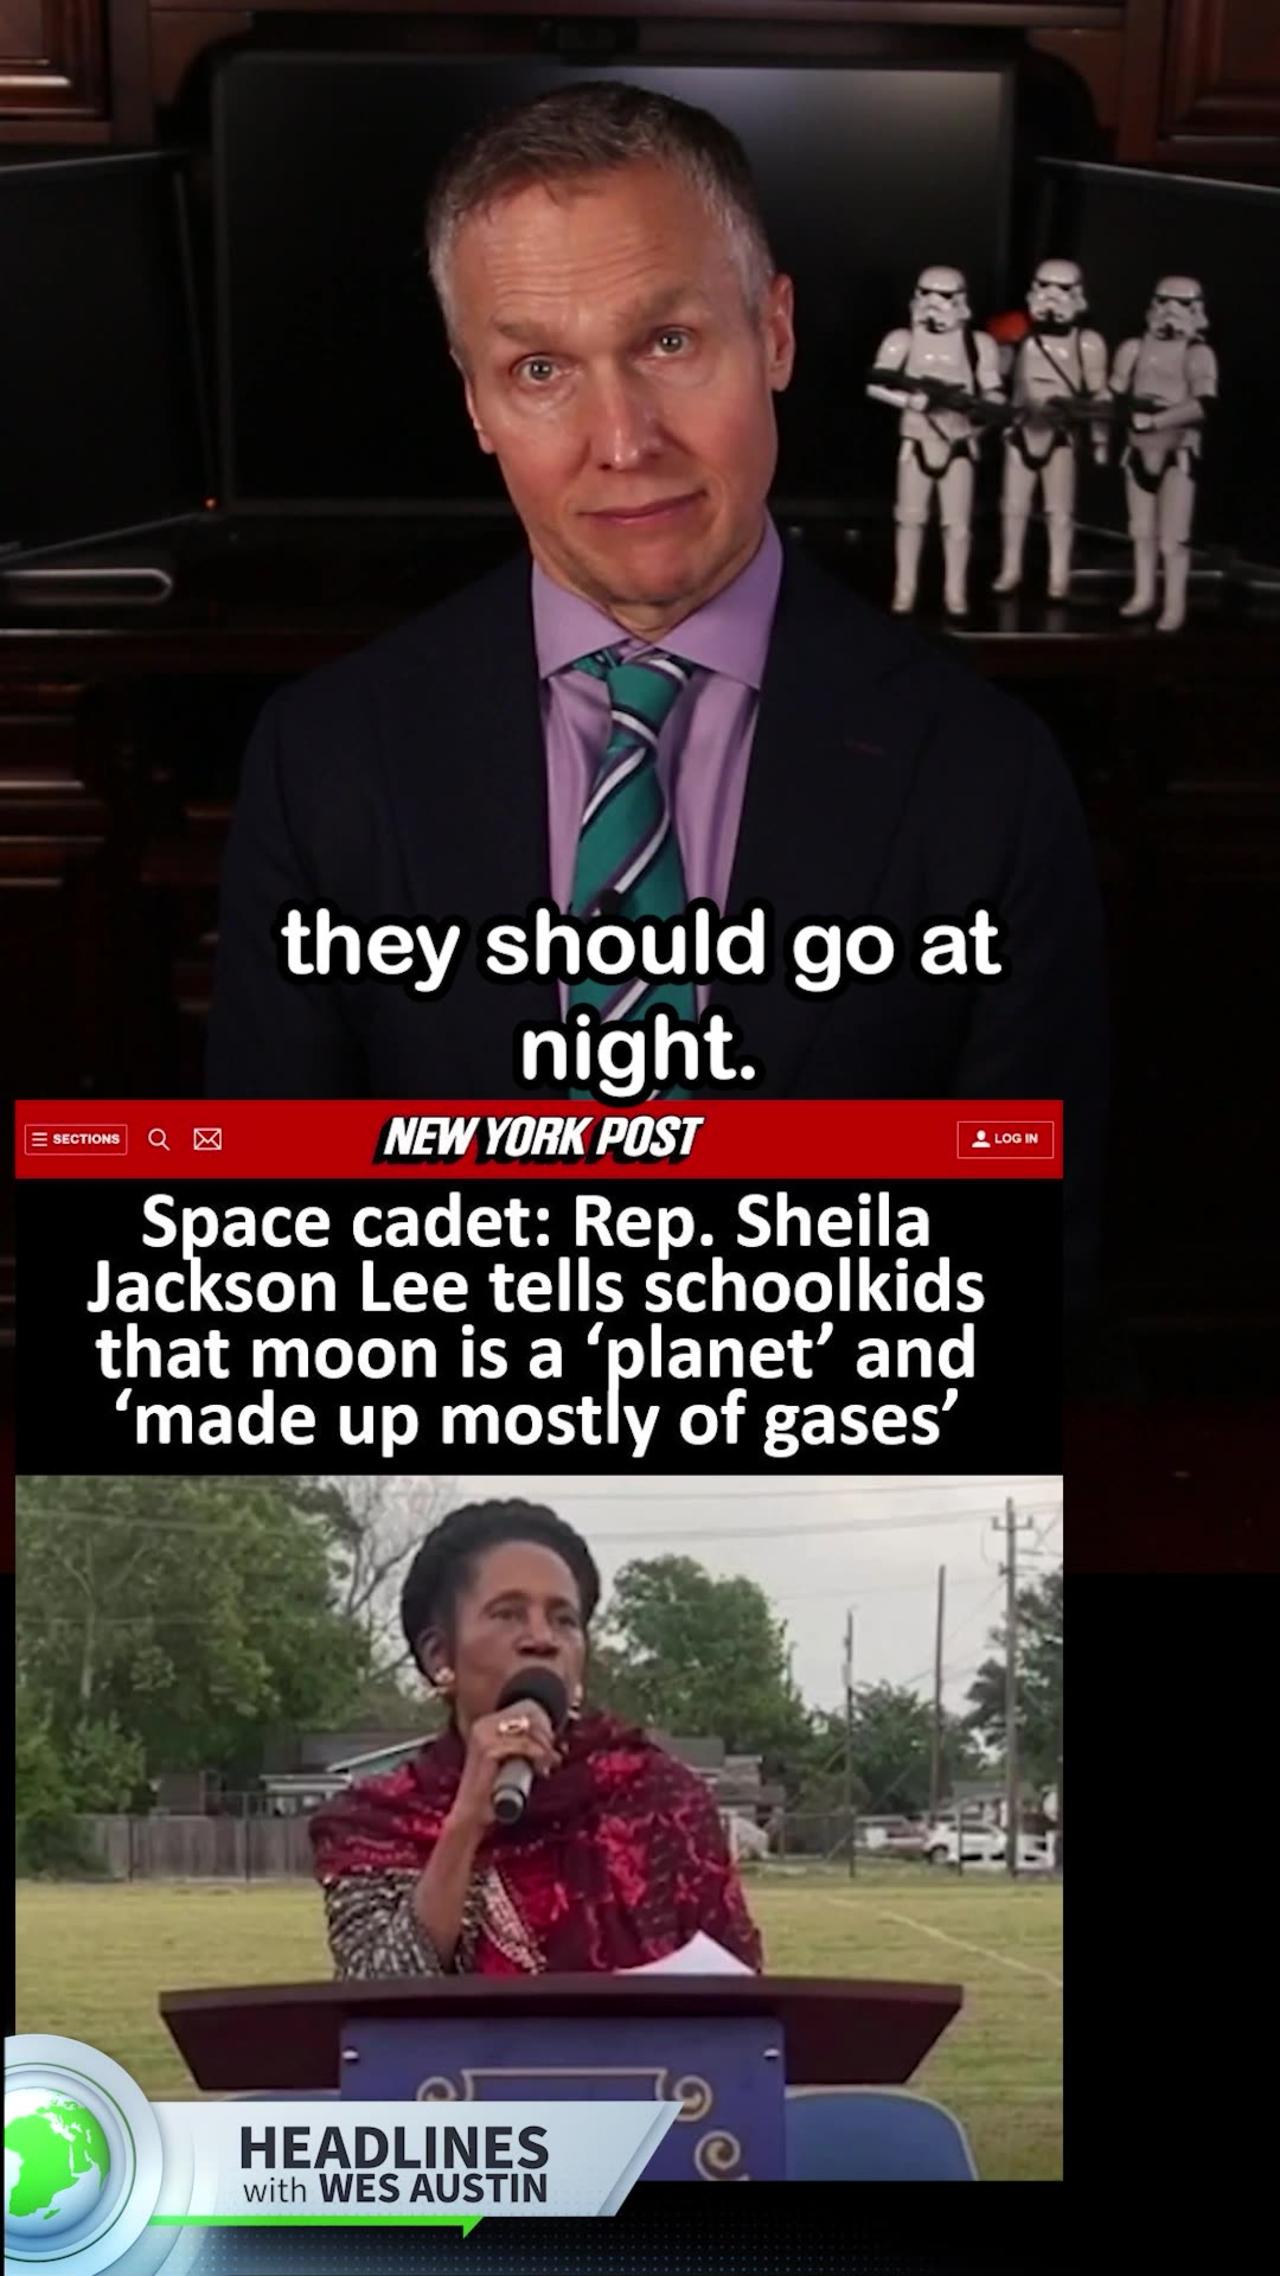 Rep Sheila Jackson Lee Tells Schoolkids That Moon is ‘Made Up Mostly of Gases’